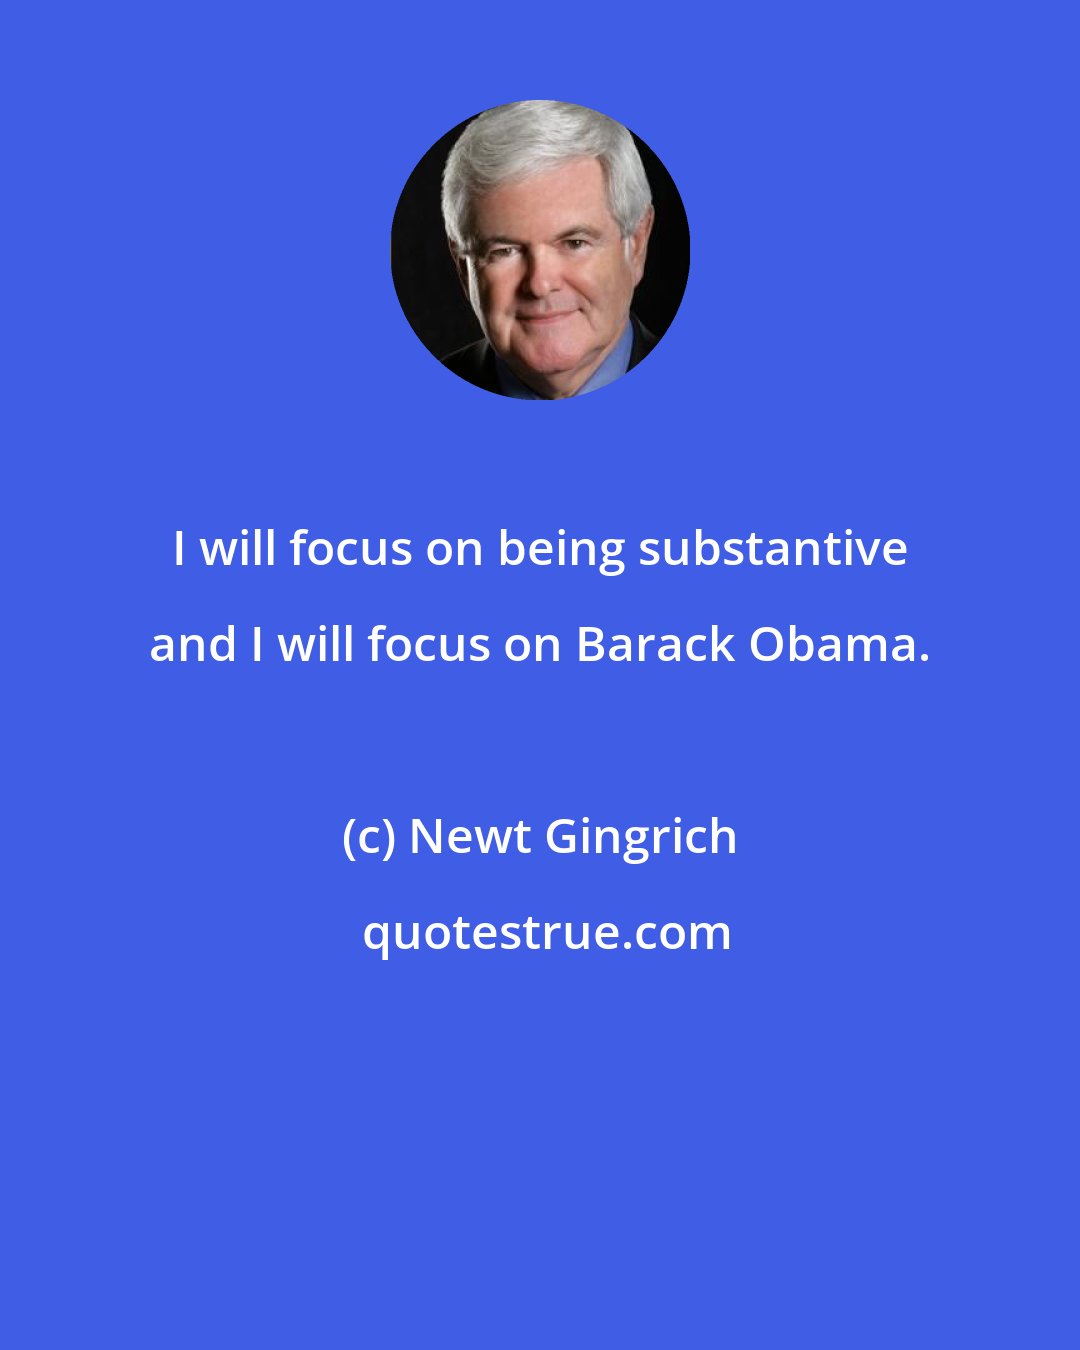 Newt Gingrich: I will focus on being substantive and I will focus on Barack Obama.